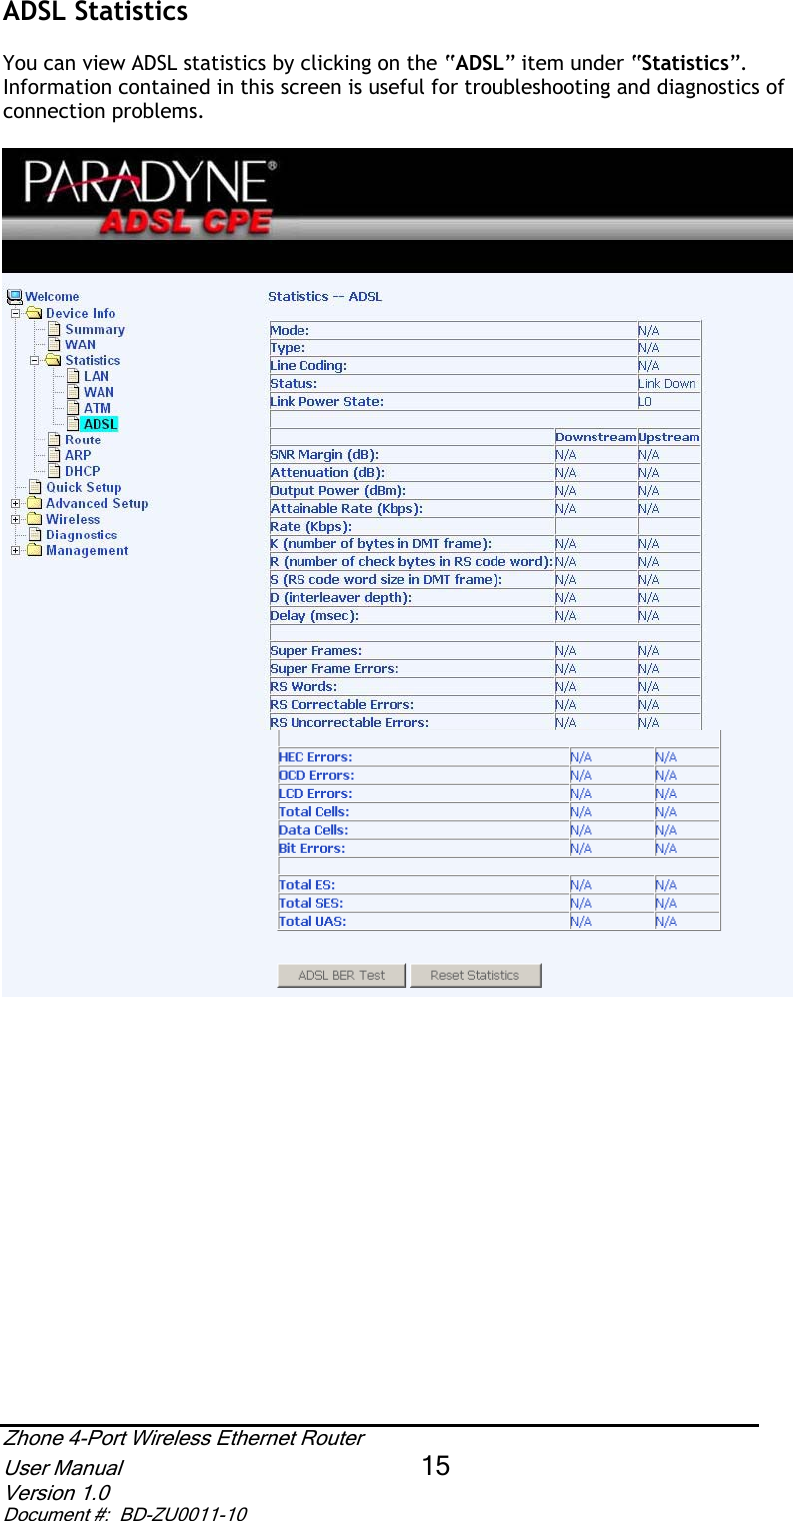 ADSL Statistics  You can view ADSL statistics by clicking on the “ADSL” item under “Statistics”.Information contained in this screen is useful for troubleshooting and diagnostics of connection problems.   Zhone 4-Port Wireless Ethernet Router User Manual 15Version 1.0 Document #:  BD-ZU0011-10